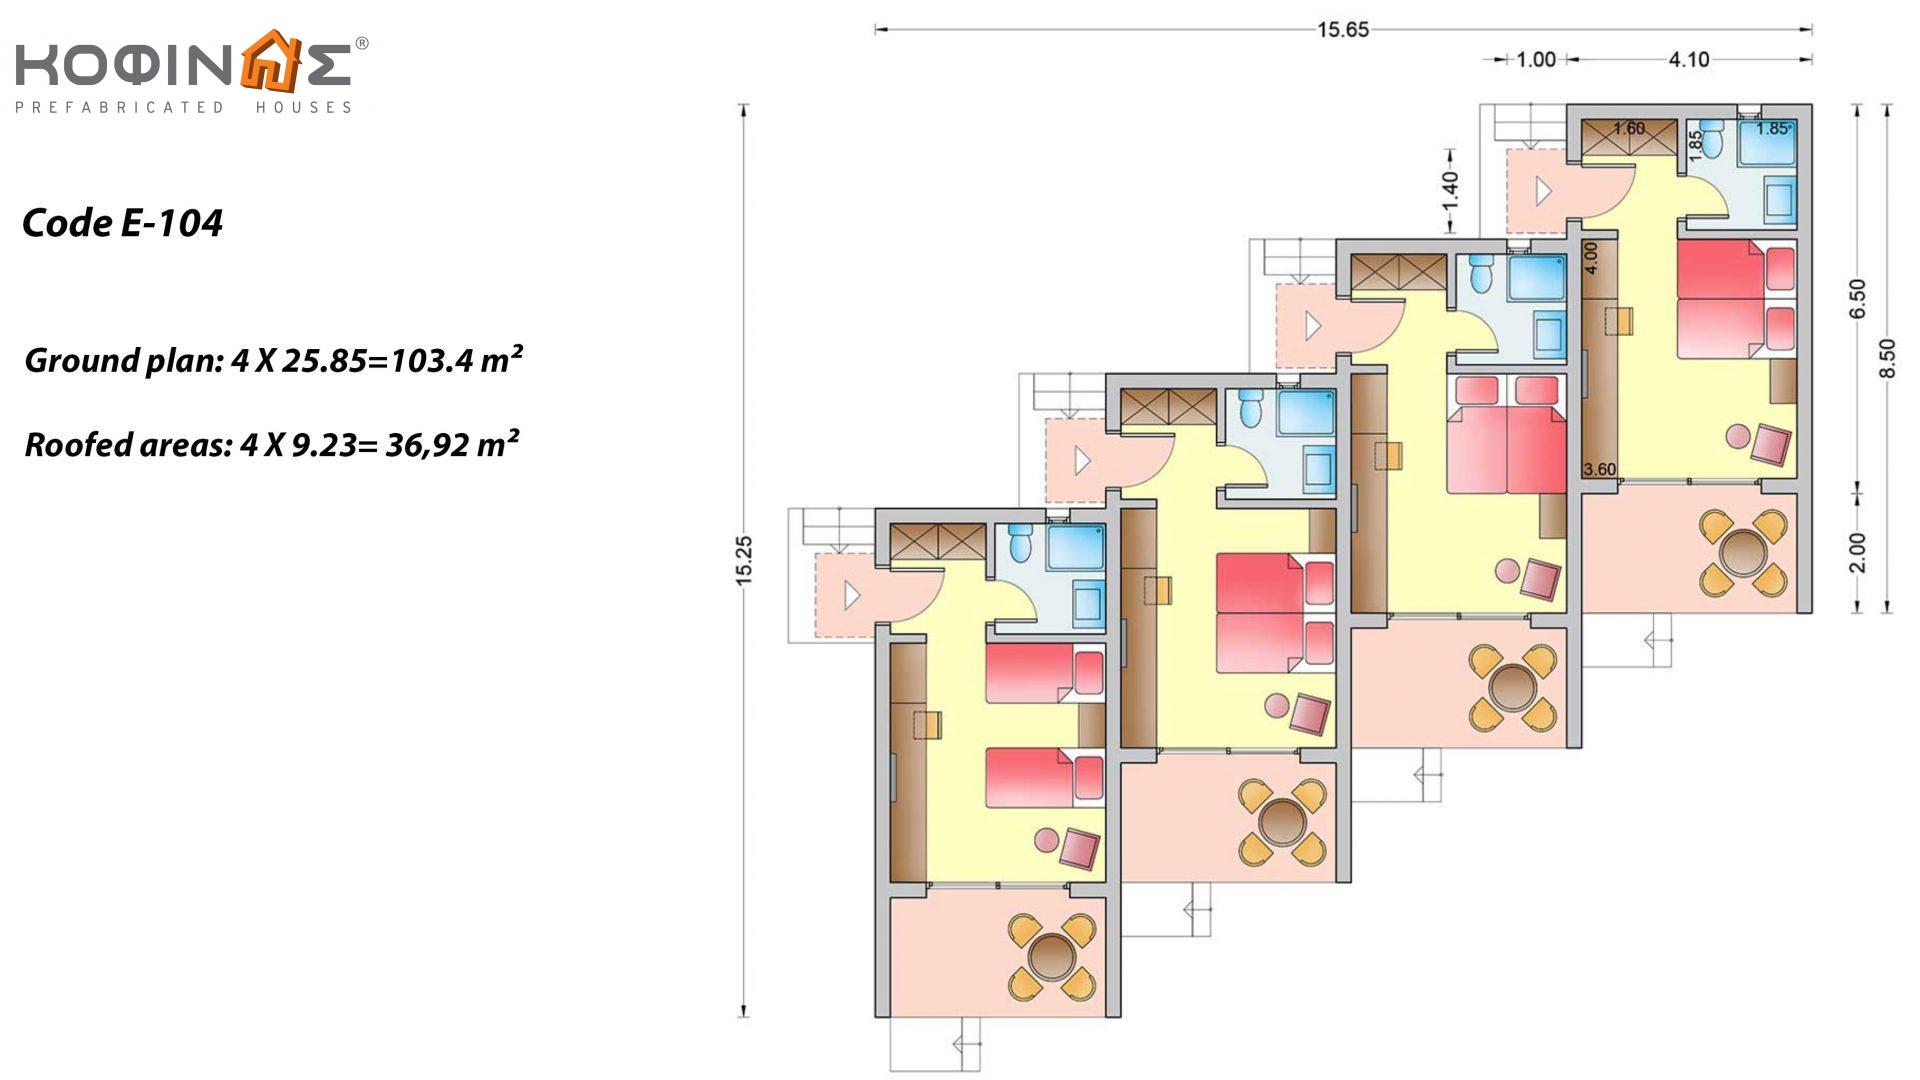 Complex of 1-story houses E-104, total surface of 4 x 25,85 = 103,40 m², roofed areas 36.92 m²